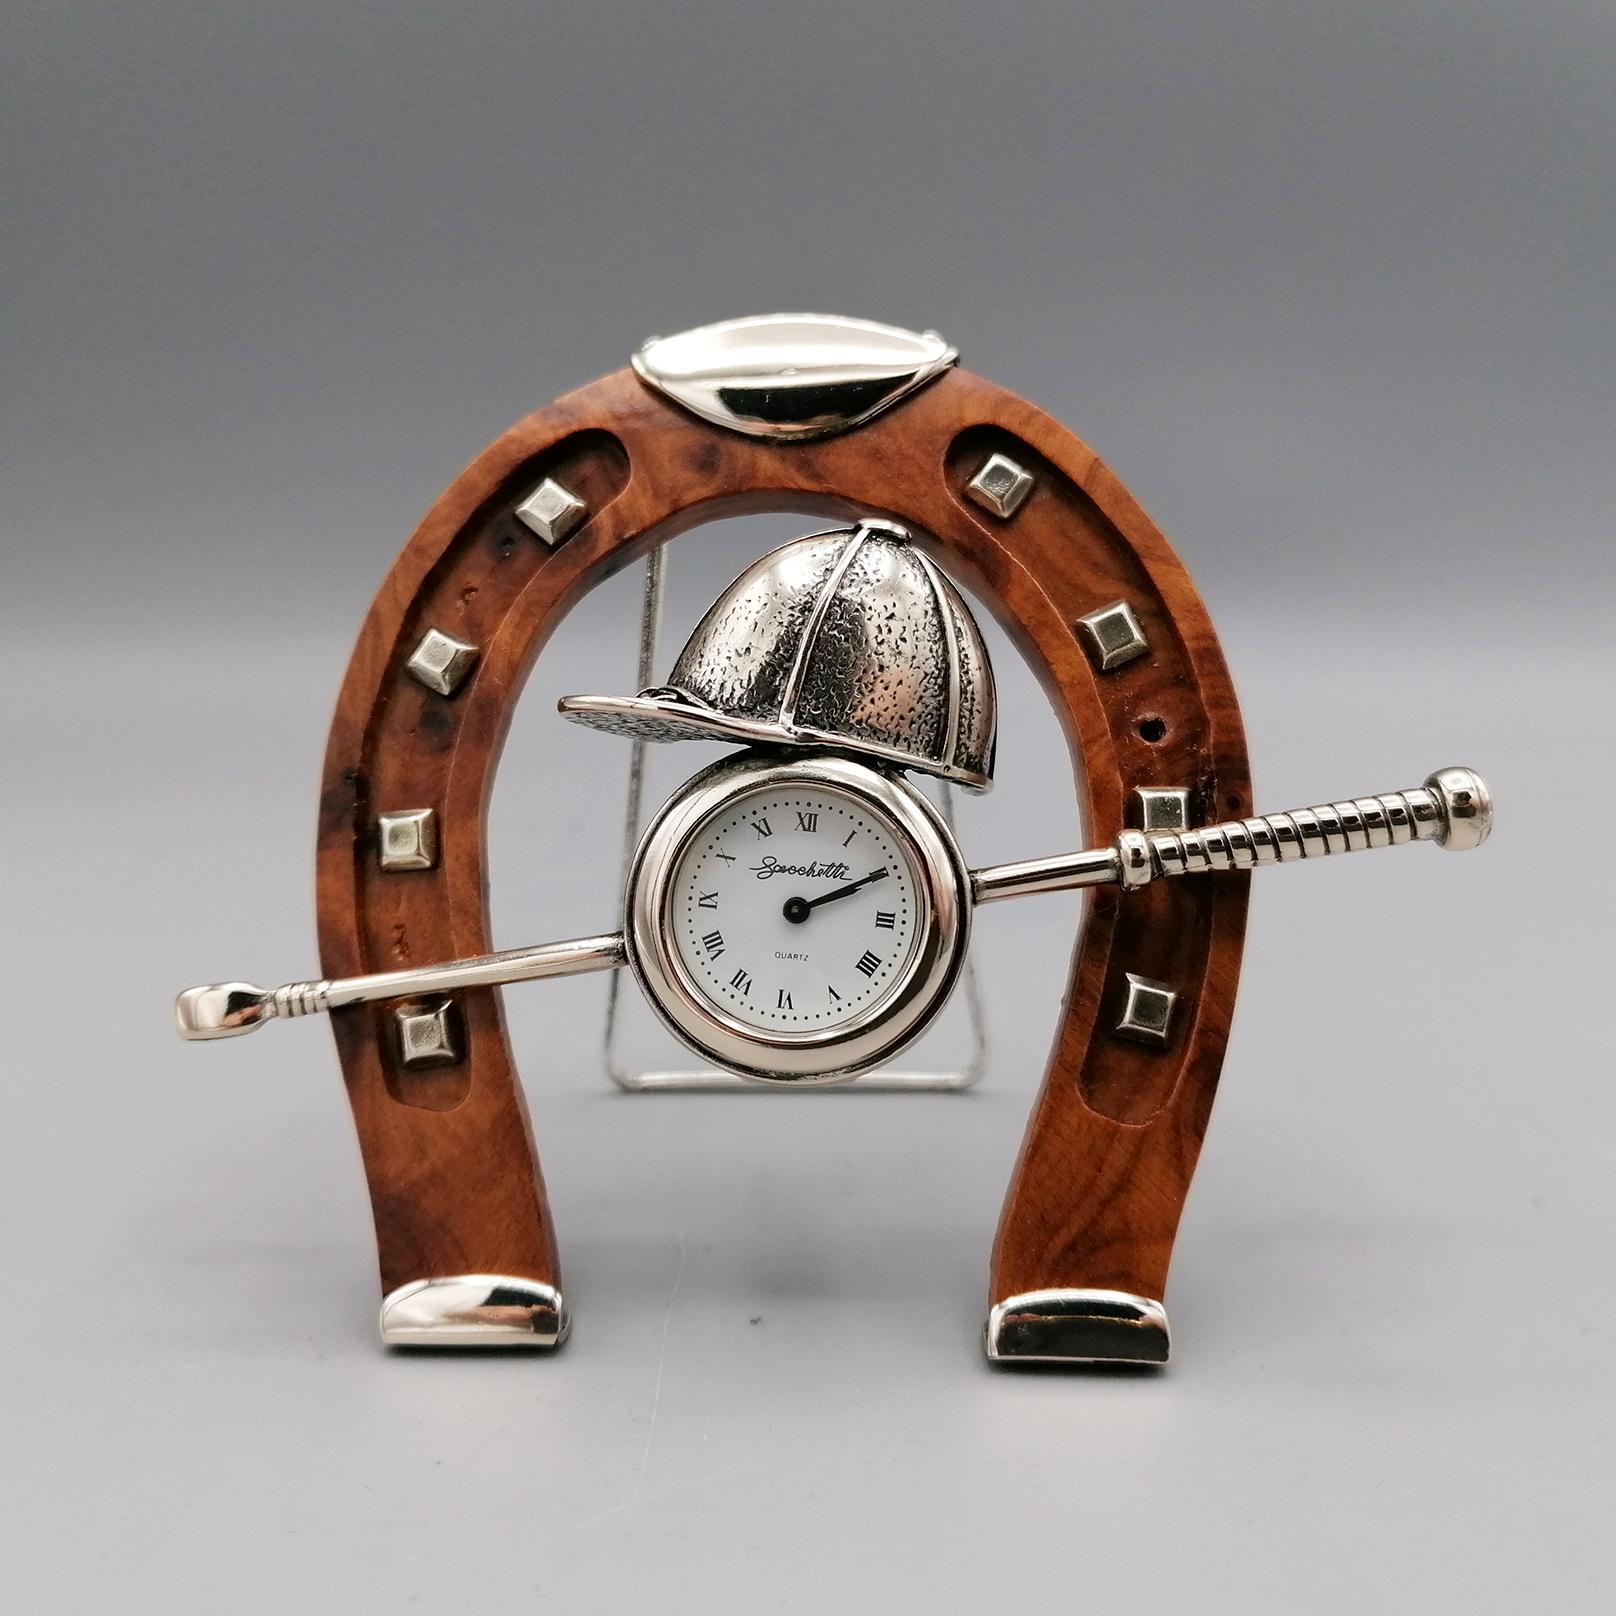 Table clock in 800 silver and wood depicting polo game equipment.
The bat and polo hat are part of the watch. 
The briar horseshoe has silver details on the base and top.
The back support is also in silver.
 